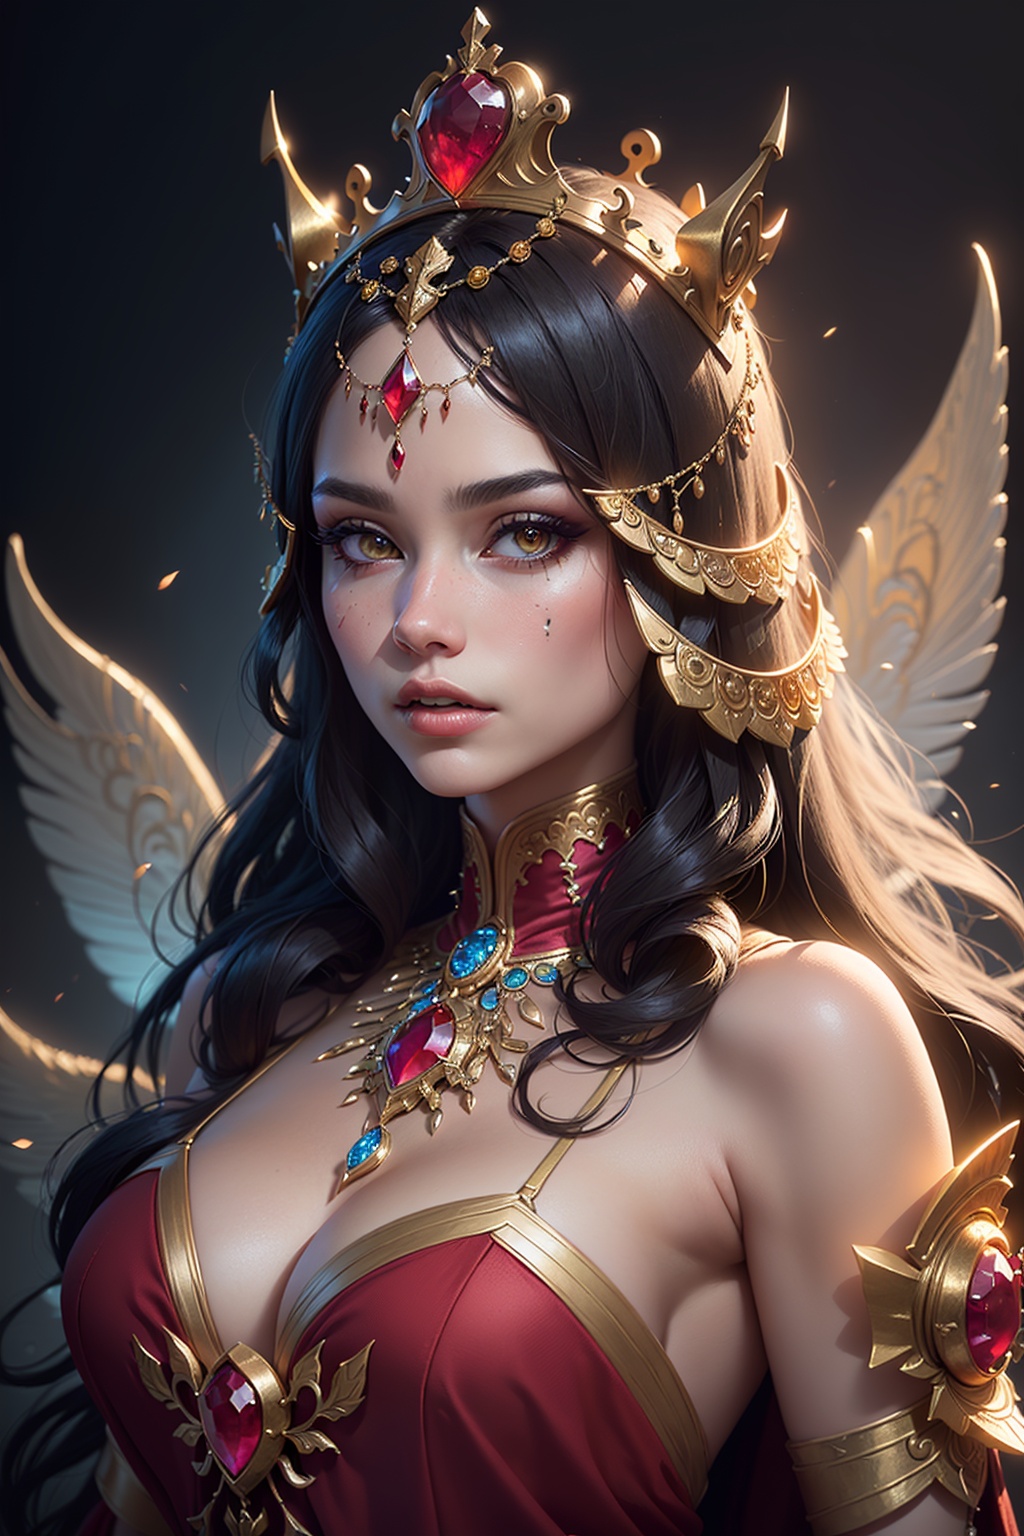 ((best quality)), ((masterpiece)), (detailed), close-up, person wearing costume, (Behance contest winner:1.2), fantasy art, crown of giant rubies, 3D goddess portrait, style of Ross Tran, captivating lighting, 8k resolution, striking facial expression, (elaborate costume details:1.3), vibrant colors, powerful presence, (ethereal glow:1.1)